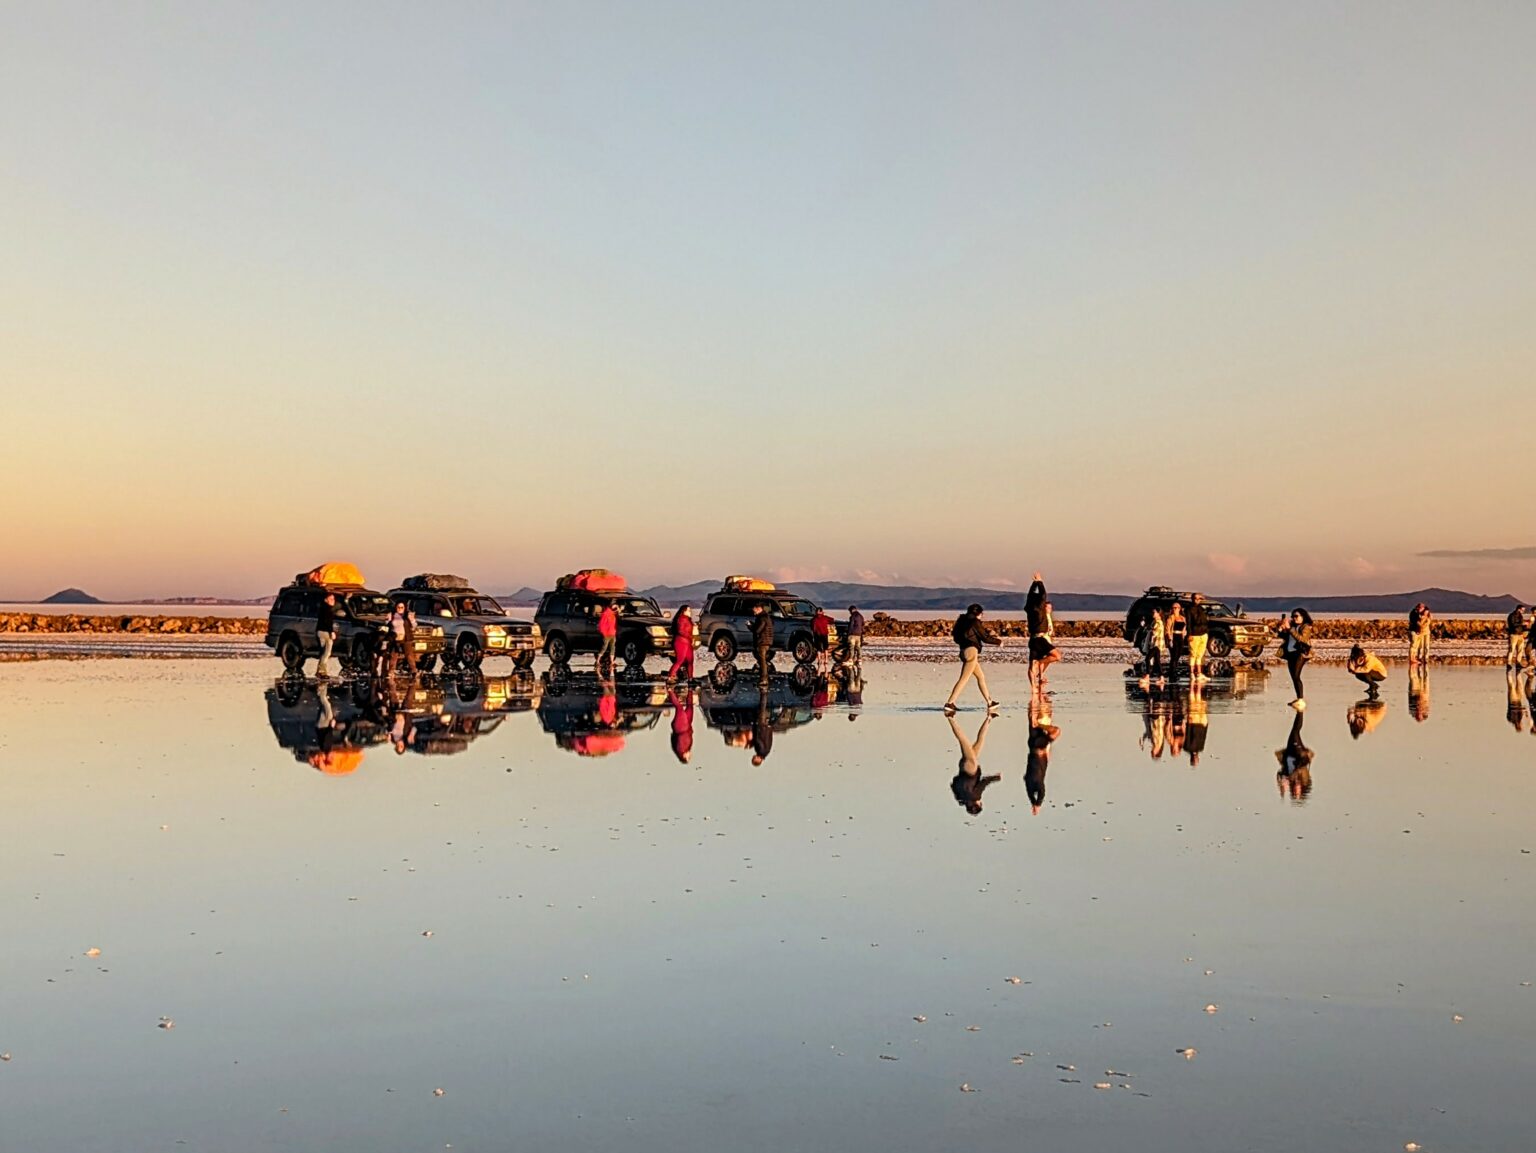 Cars and people standing on a salt flat with a reflection during the Uyuni Salt Flats tour